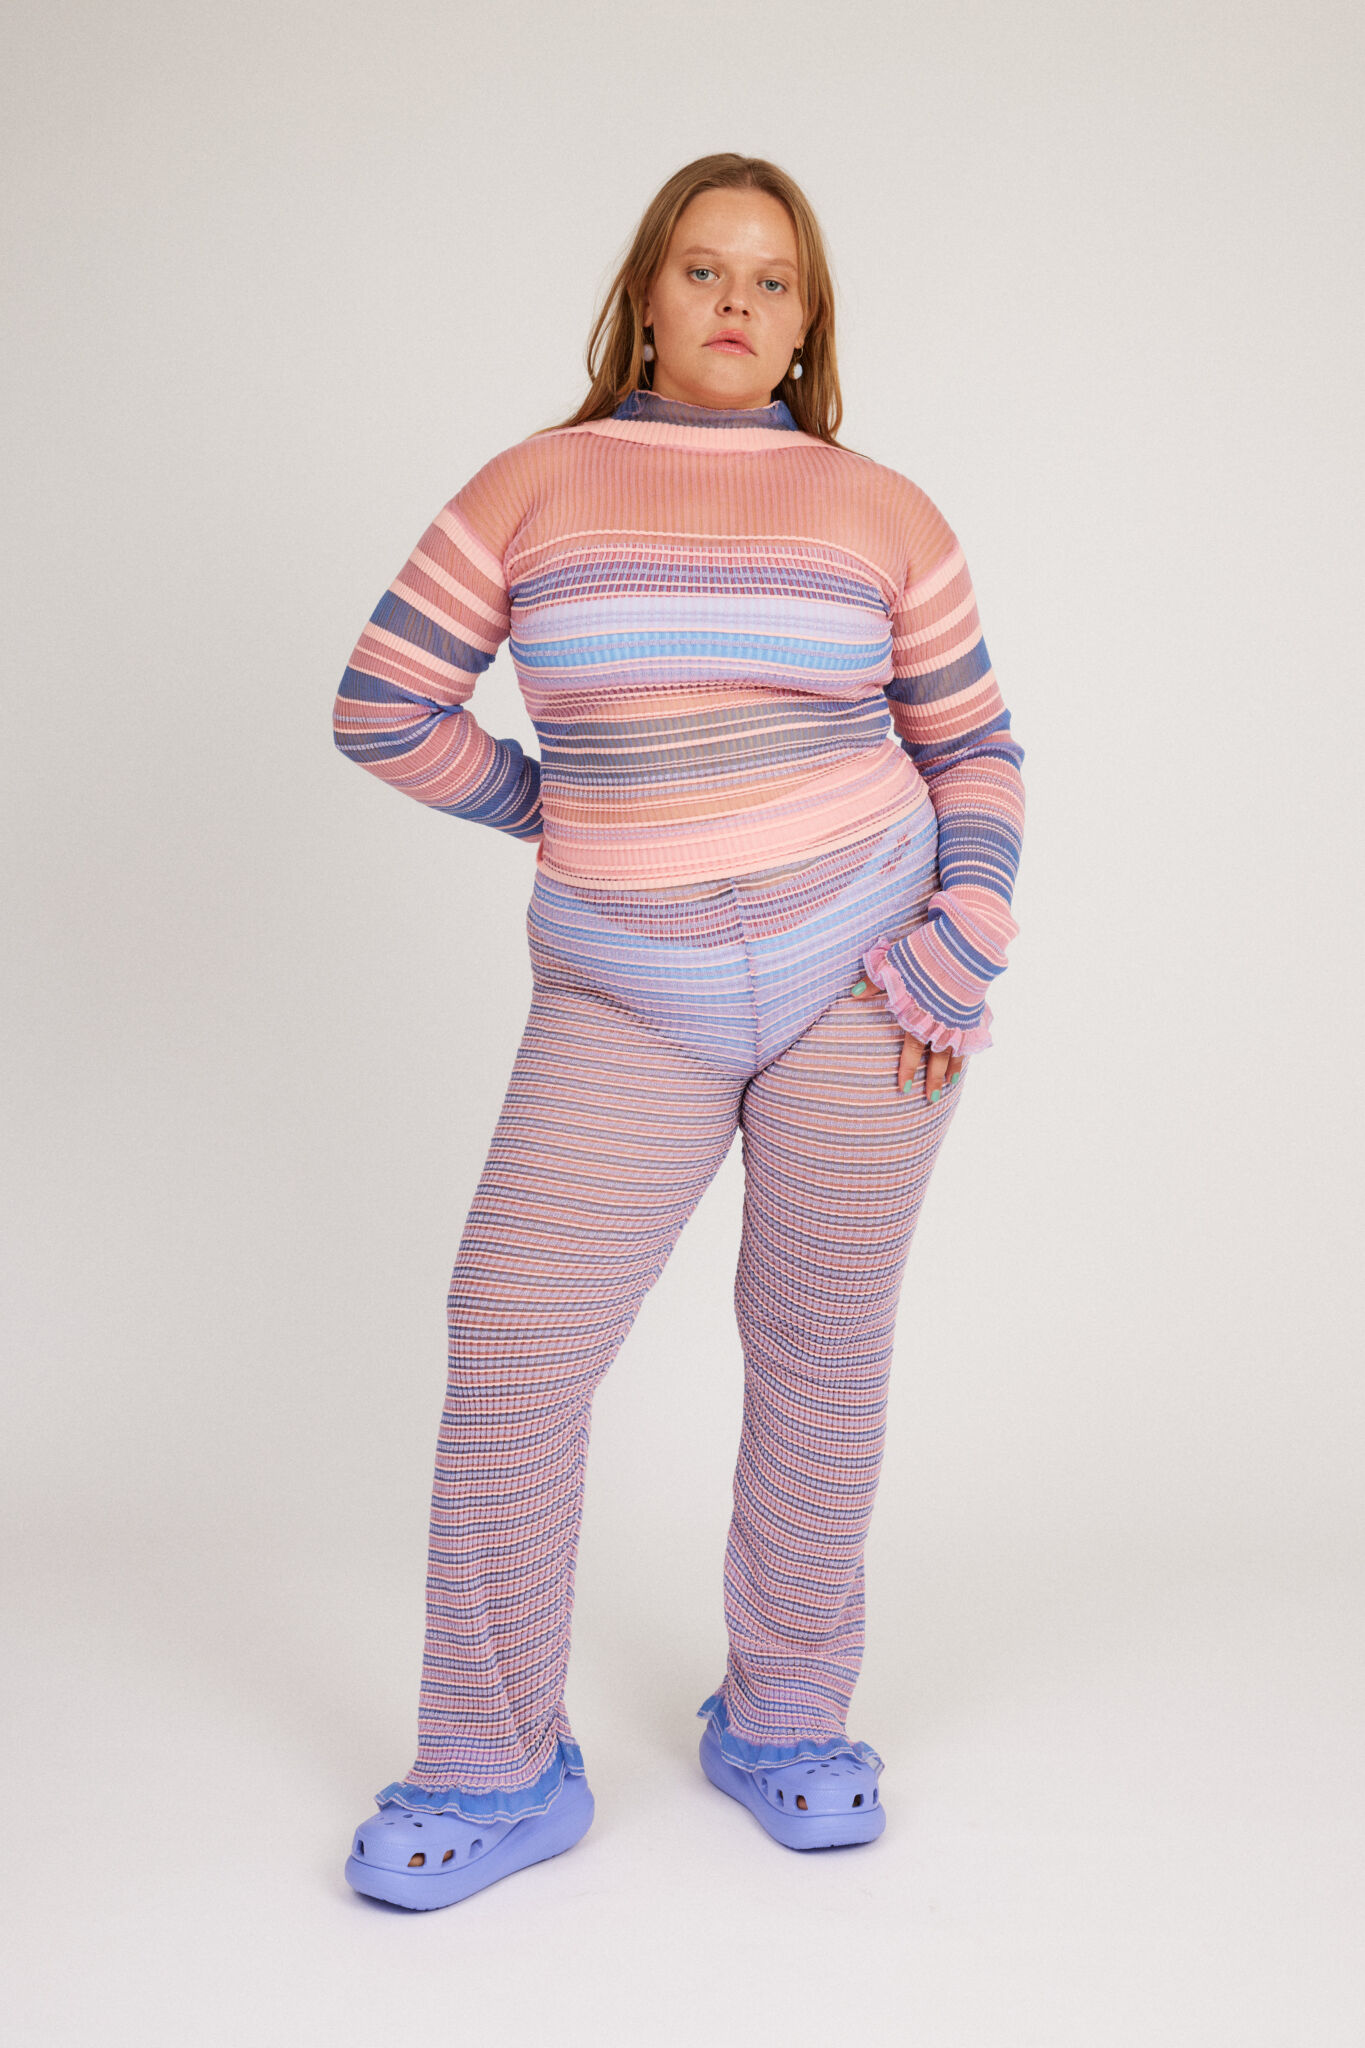 Sweet Secret Trouser in pink and powder blue are a knitted pair of transparent trousers in all over stripes with shimmery metallized yarn. The textile is lightweight, delicate and very flexible. The trousers have a body fitted silhouette that adapts to the body. Wide legged and detailed with frills and a logo waistband.